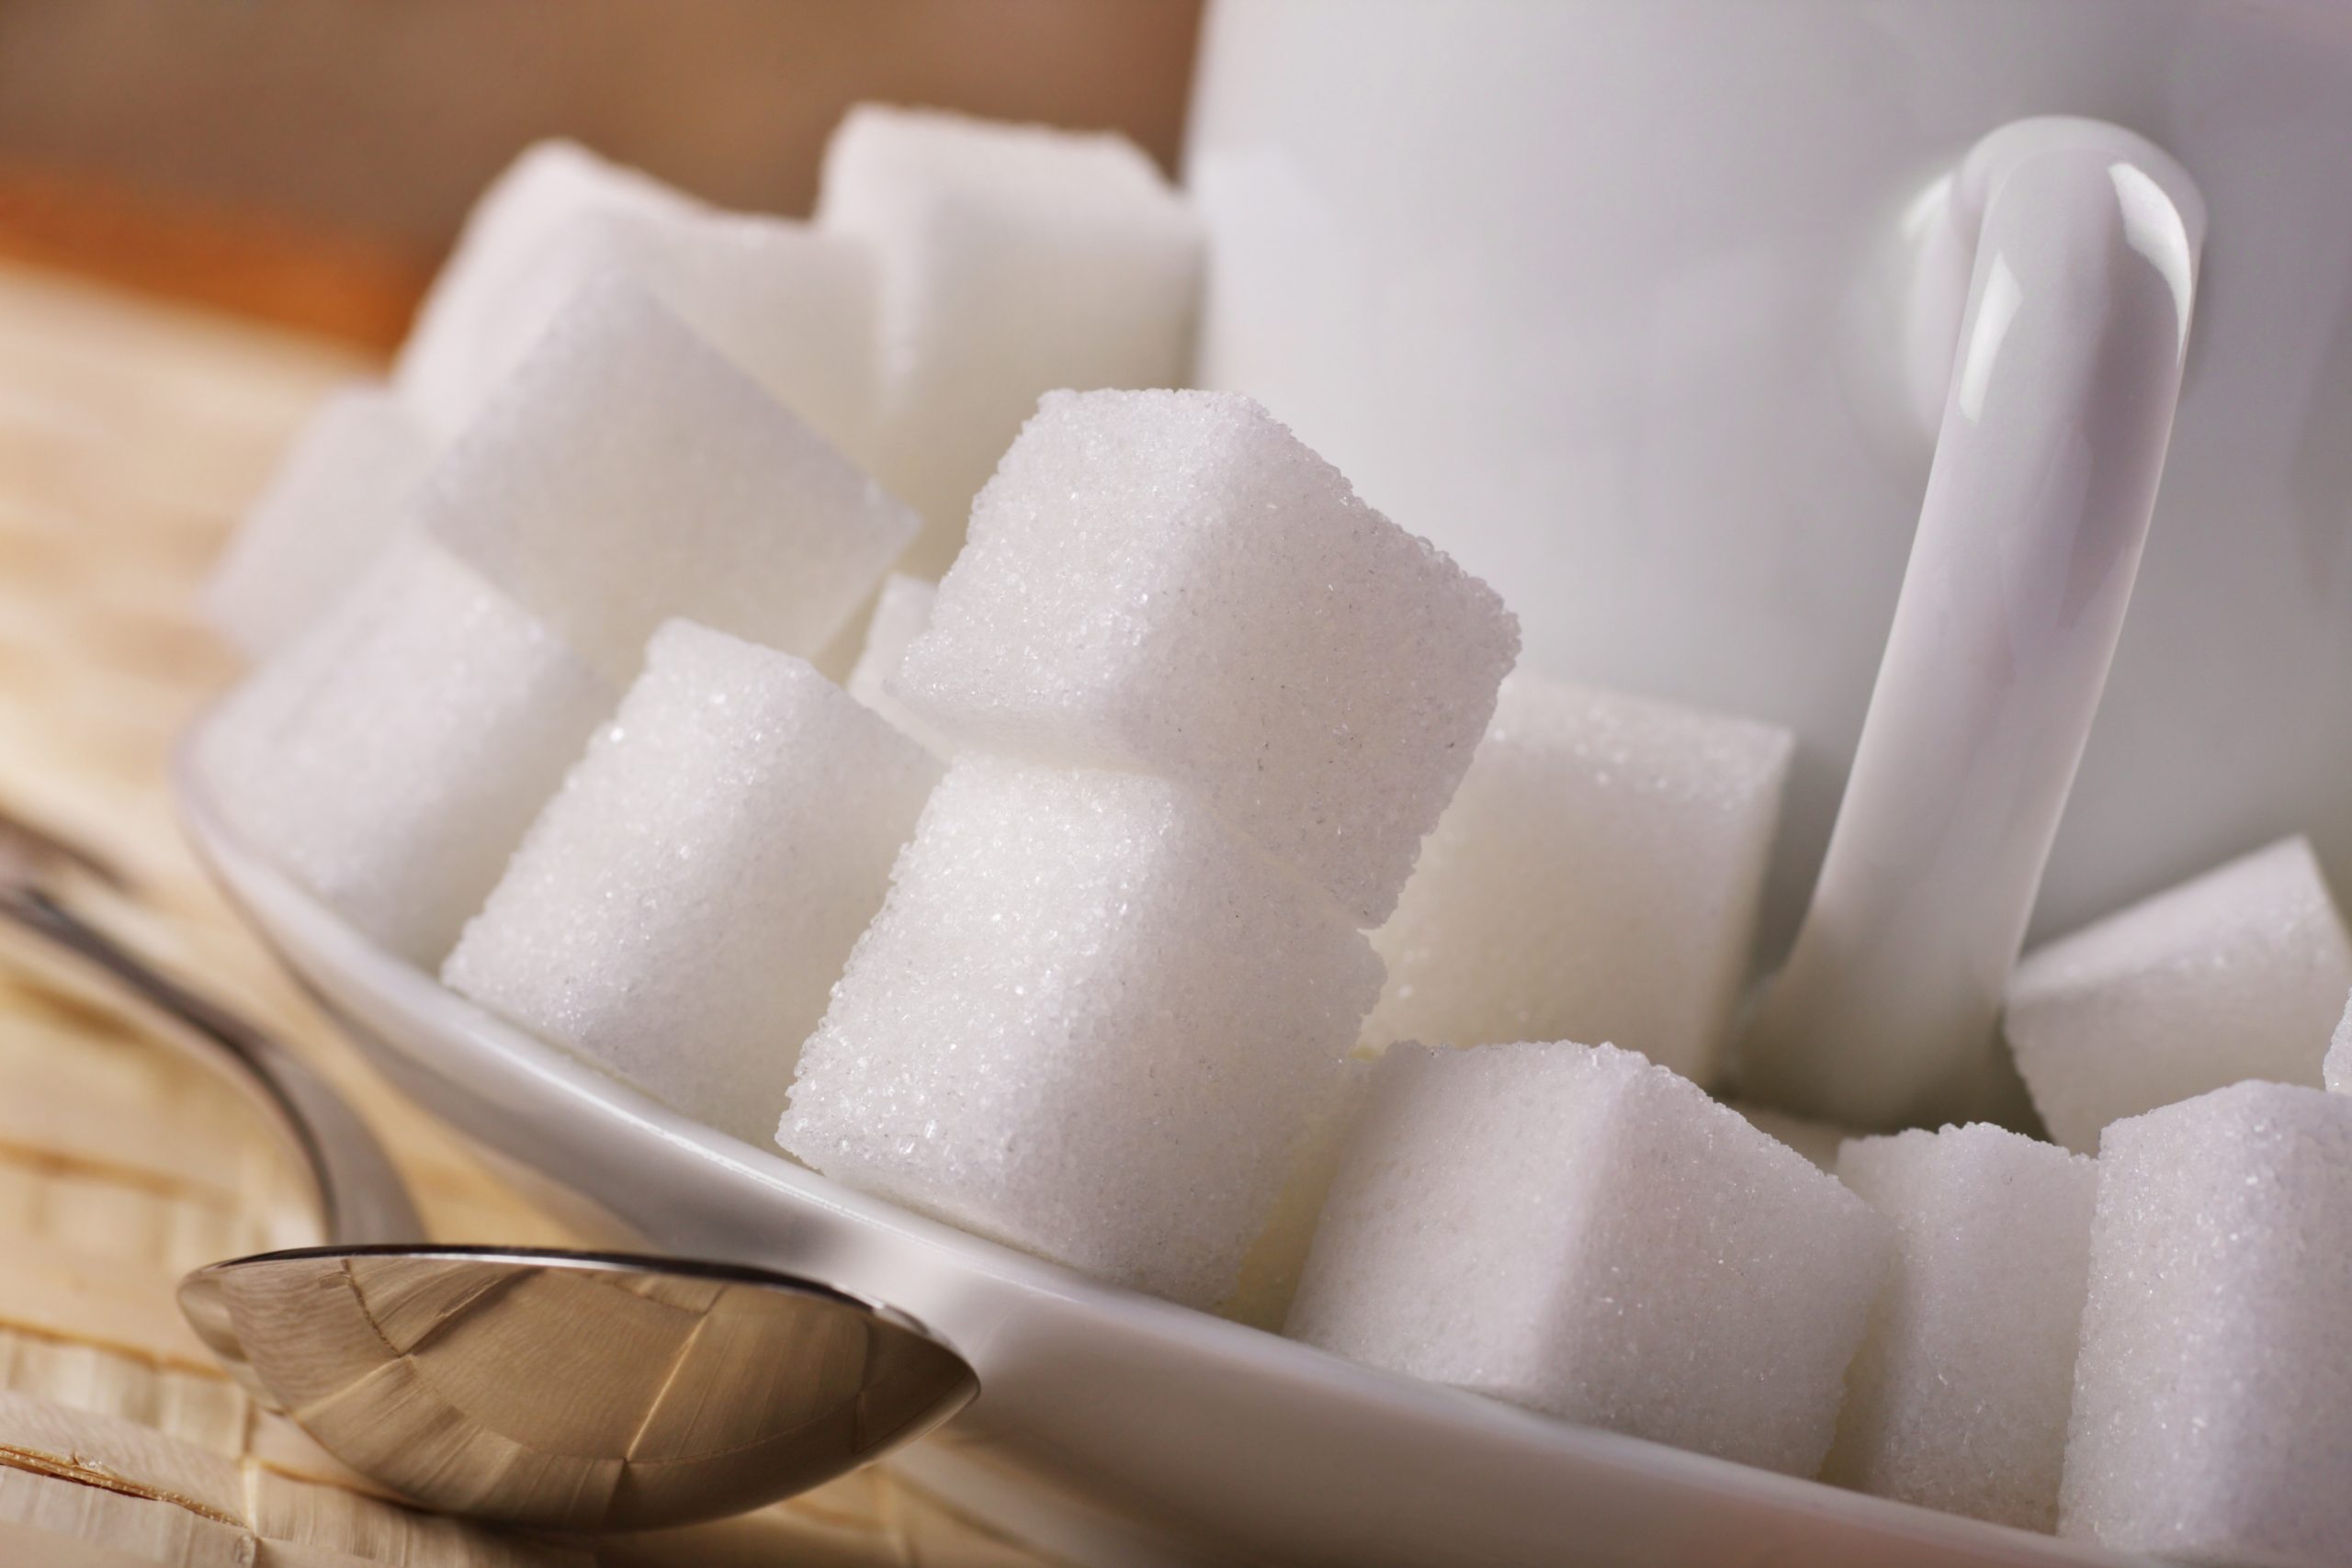 Using Artificial and Natural Sweeteners